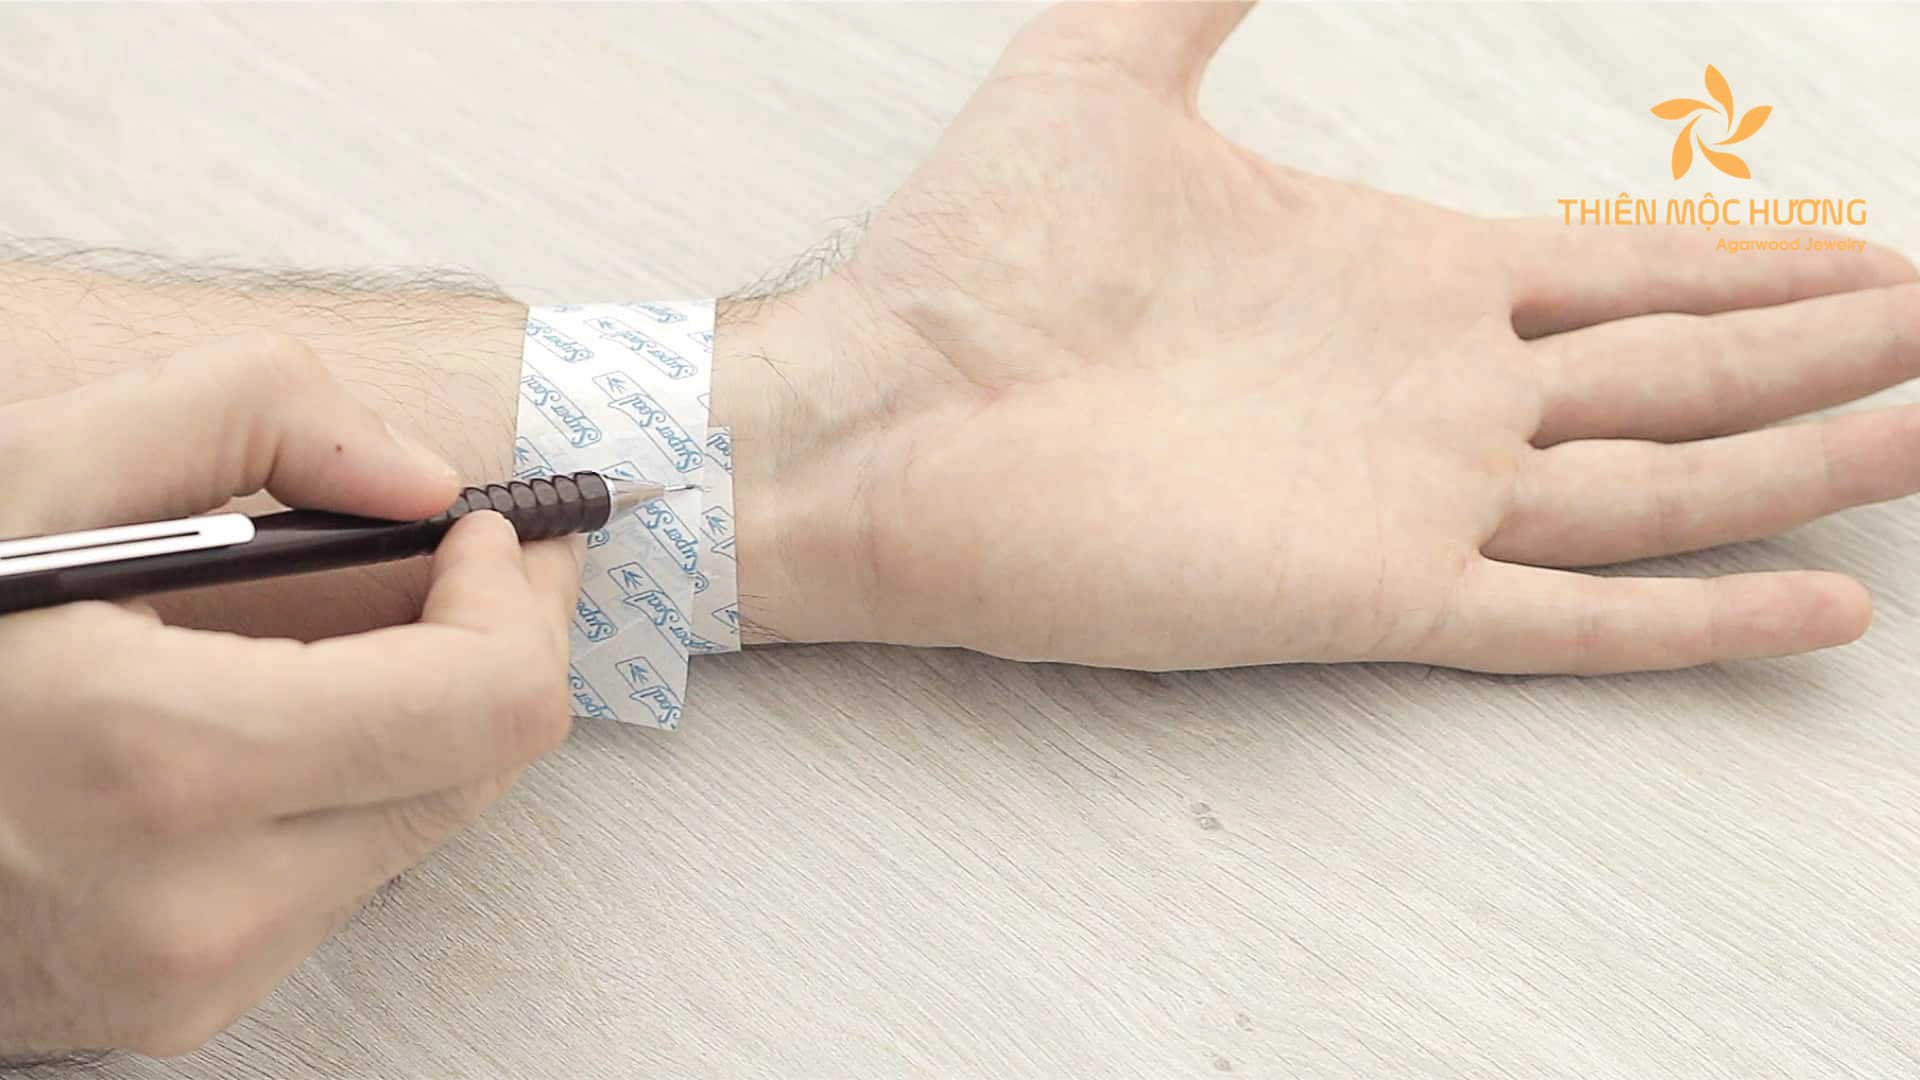 Take the measuring tape and place the end of it precisely at the midpoint of your wrist's width